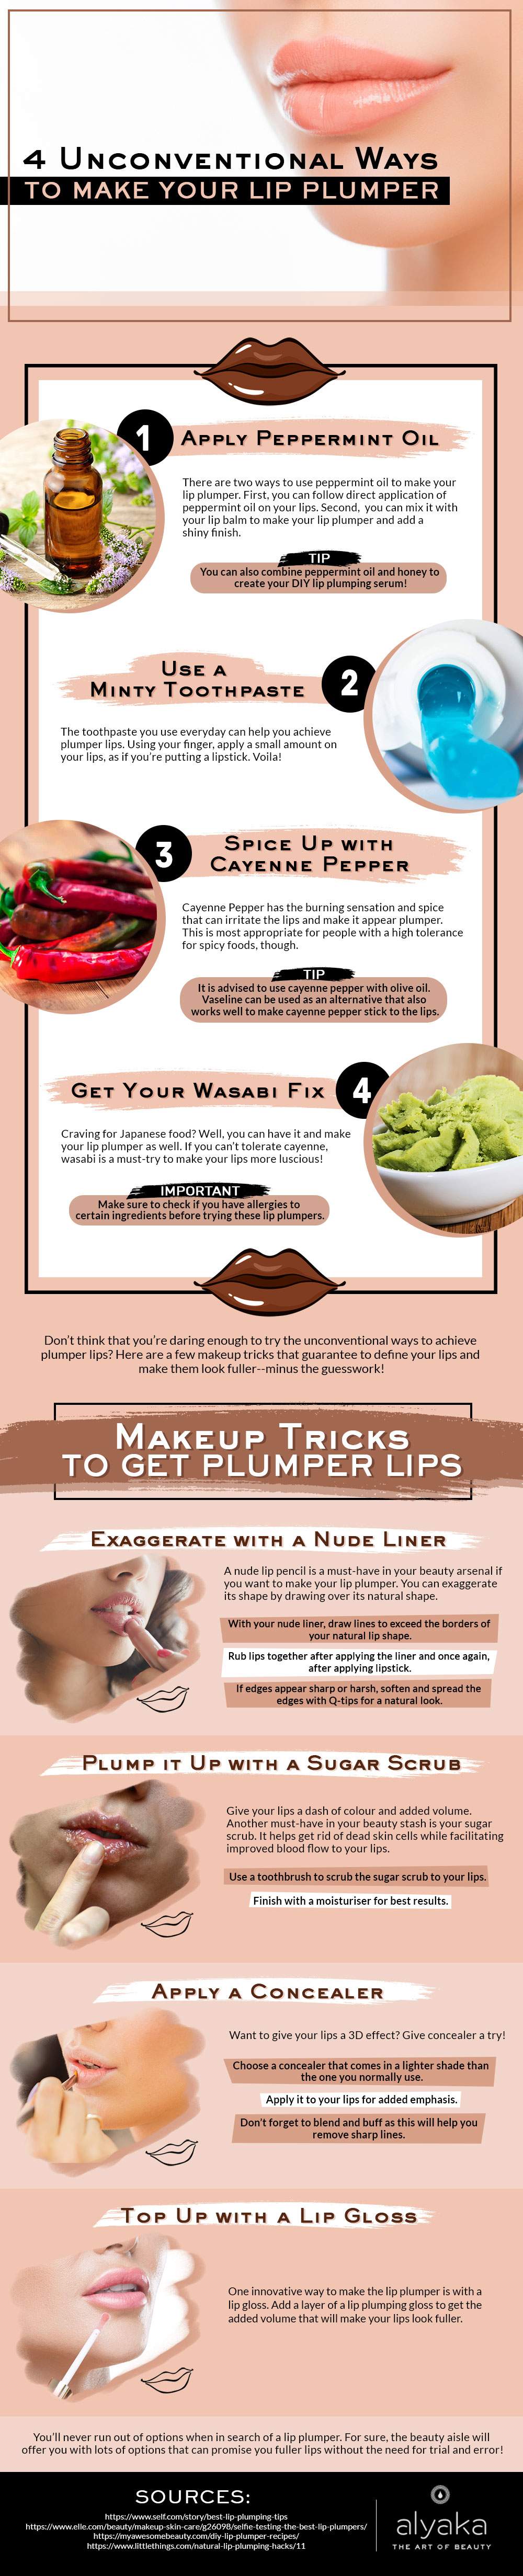 Clever Hacks To Make Your Lip Plumper